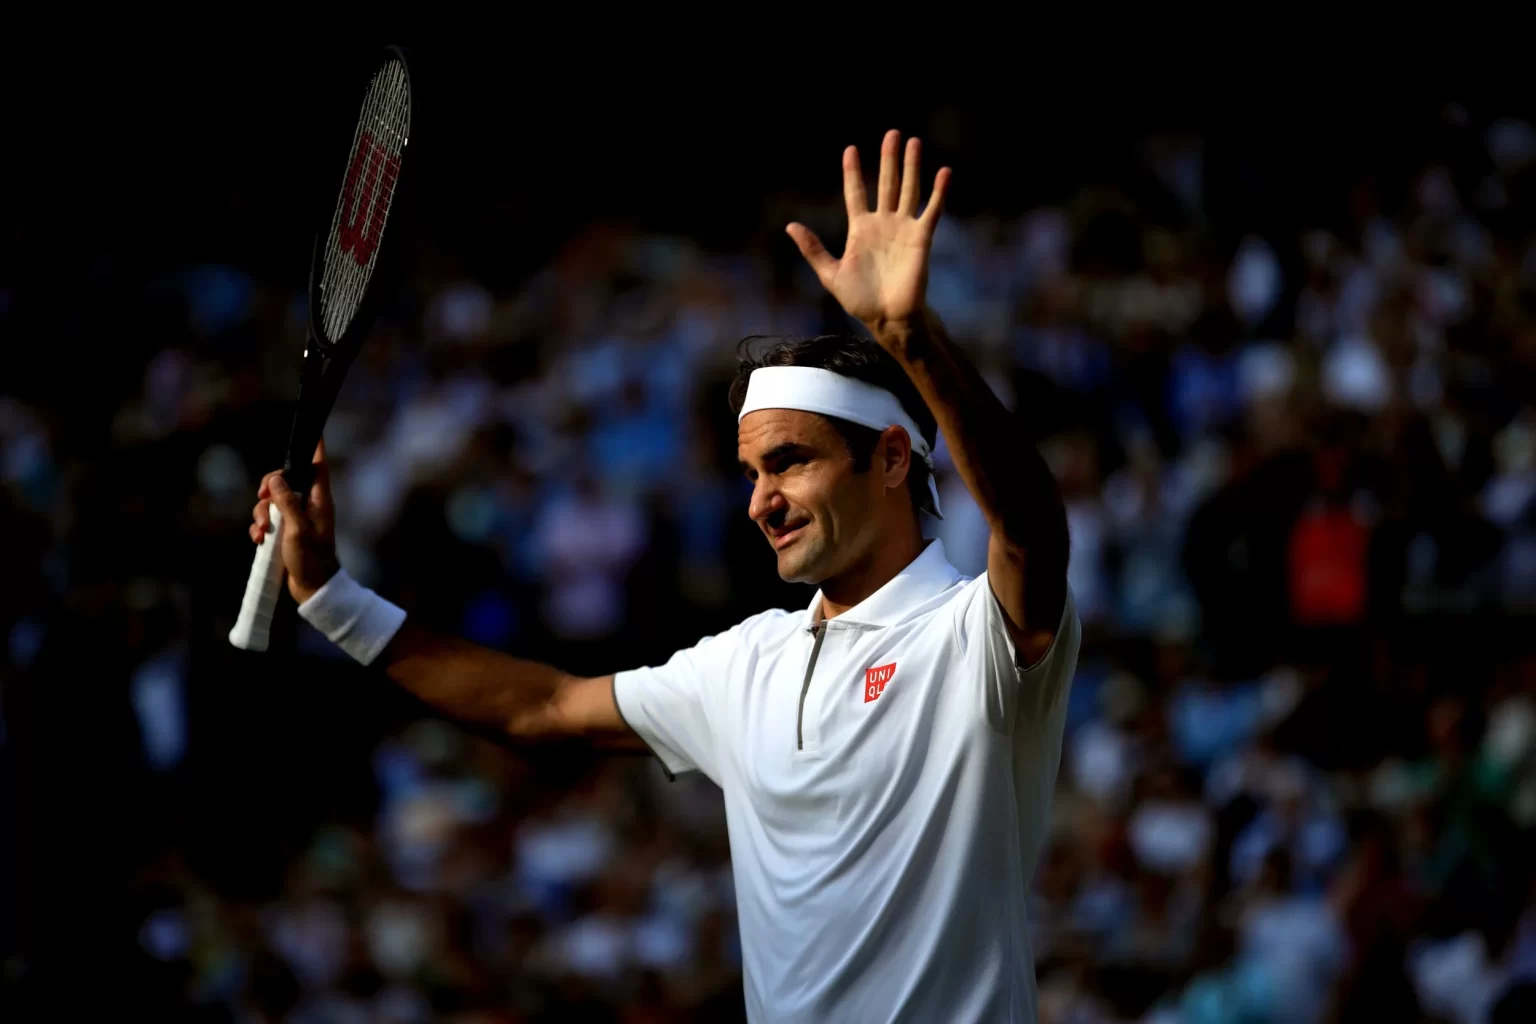 Roger Federer announces his retirement from professional tennis and will end career at Laver Cup in London